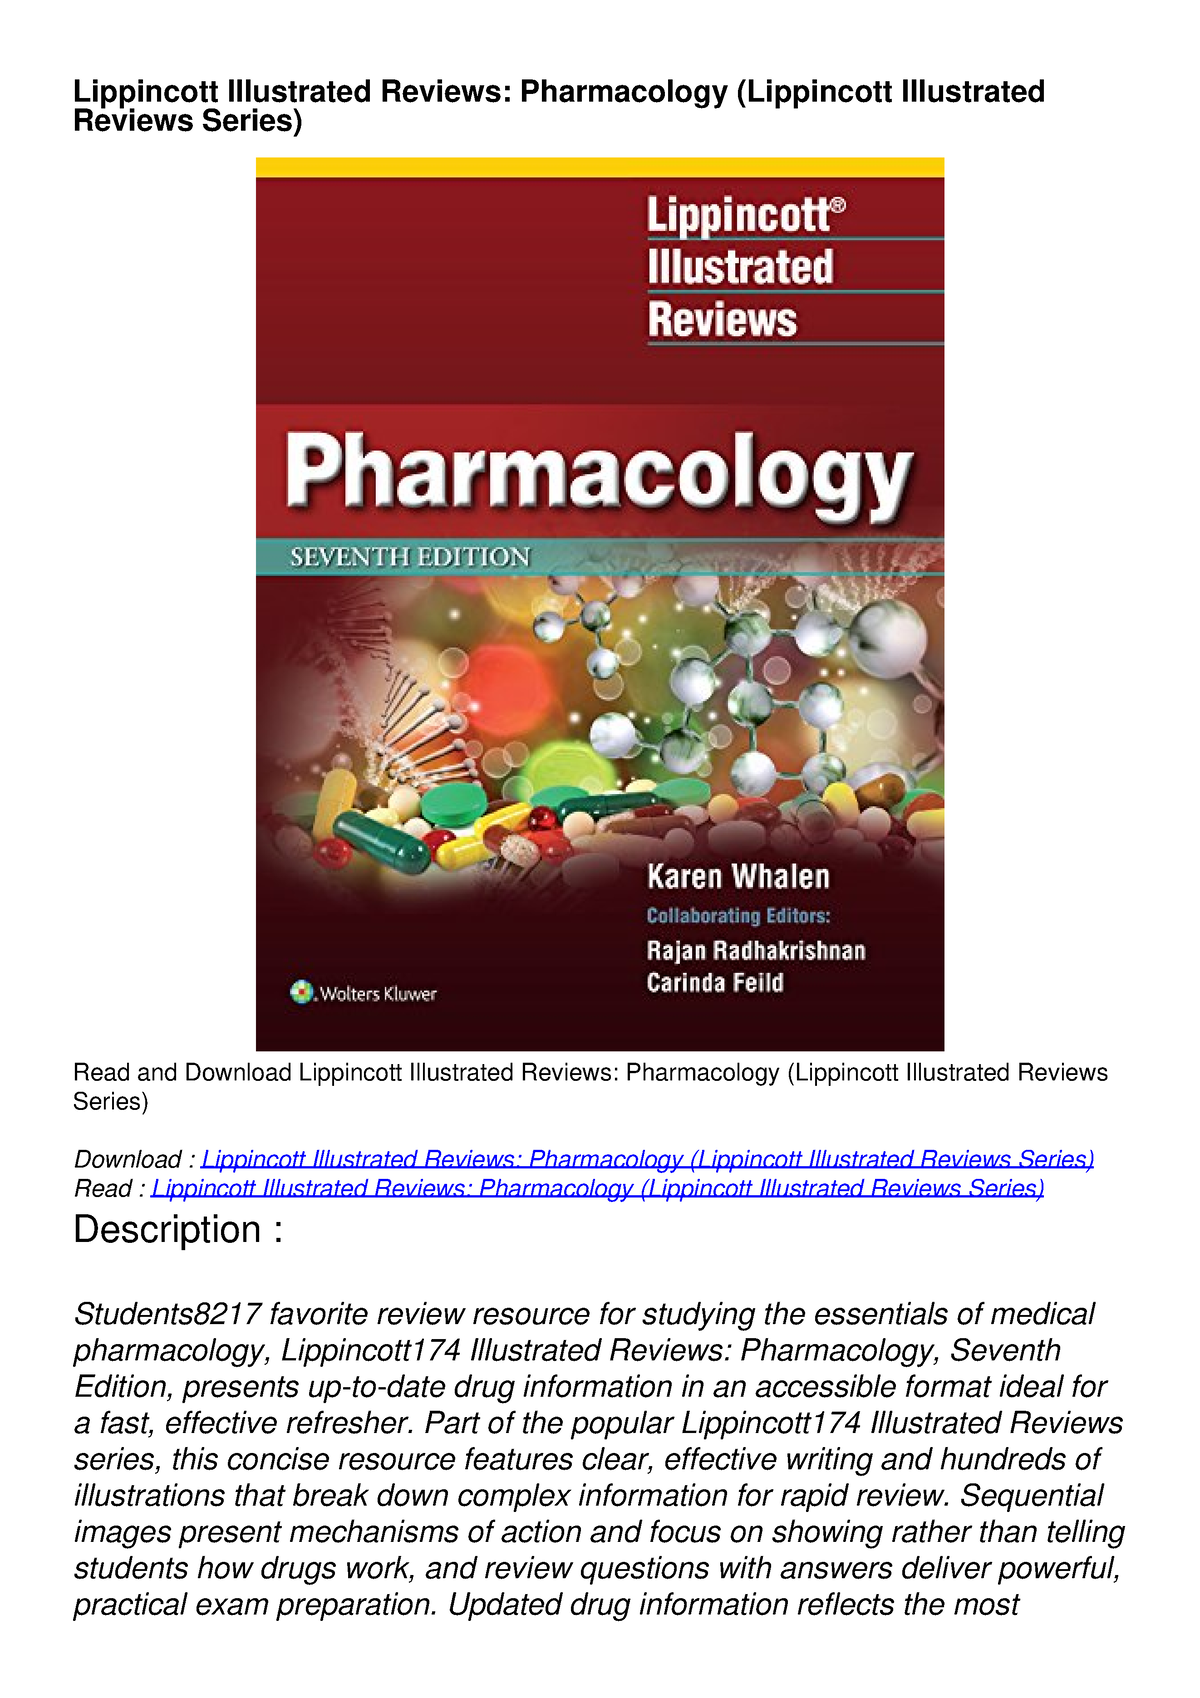 Lippincotts illustrated reviews pharmacology 4th edition pdf download latest photoshop free download for windows 10